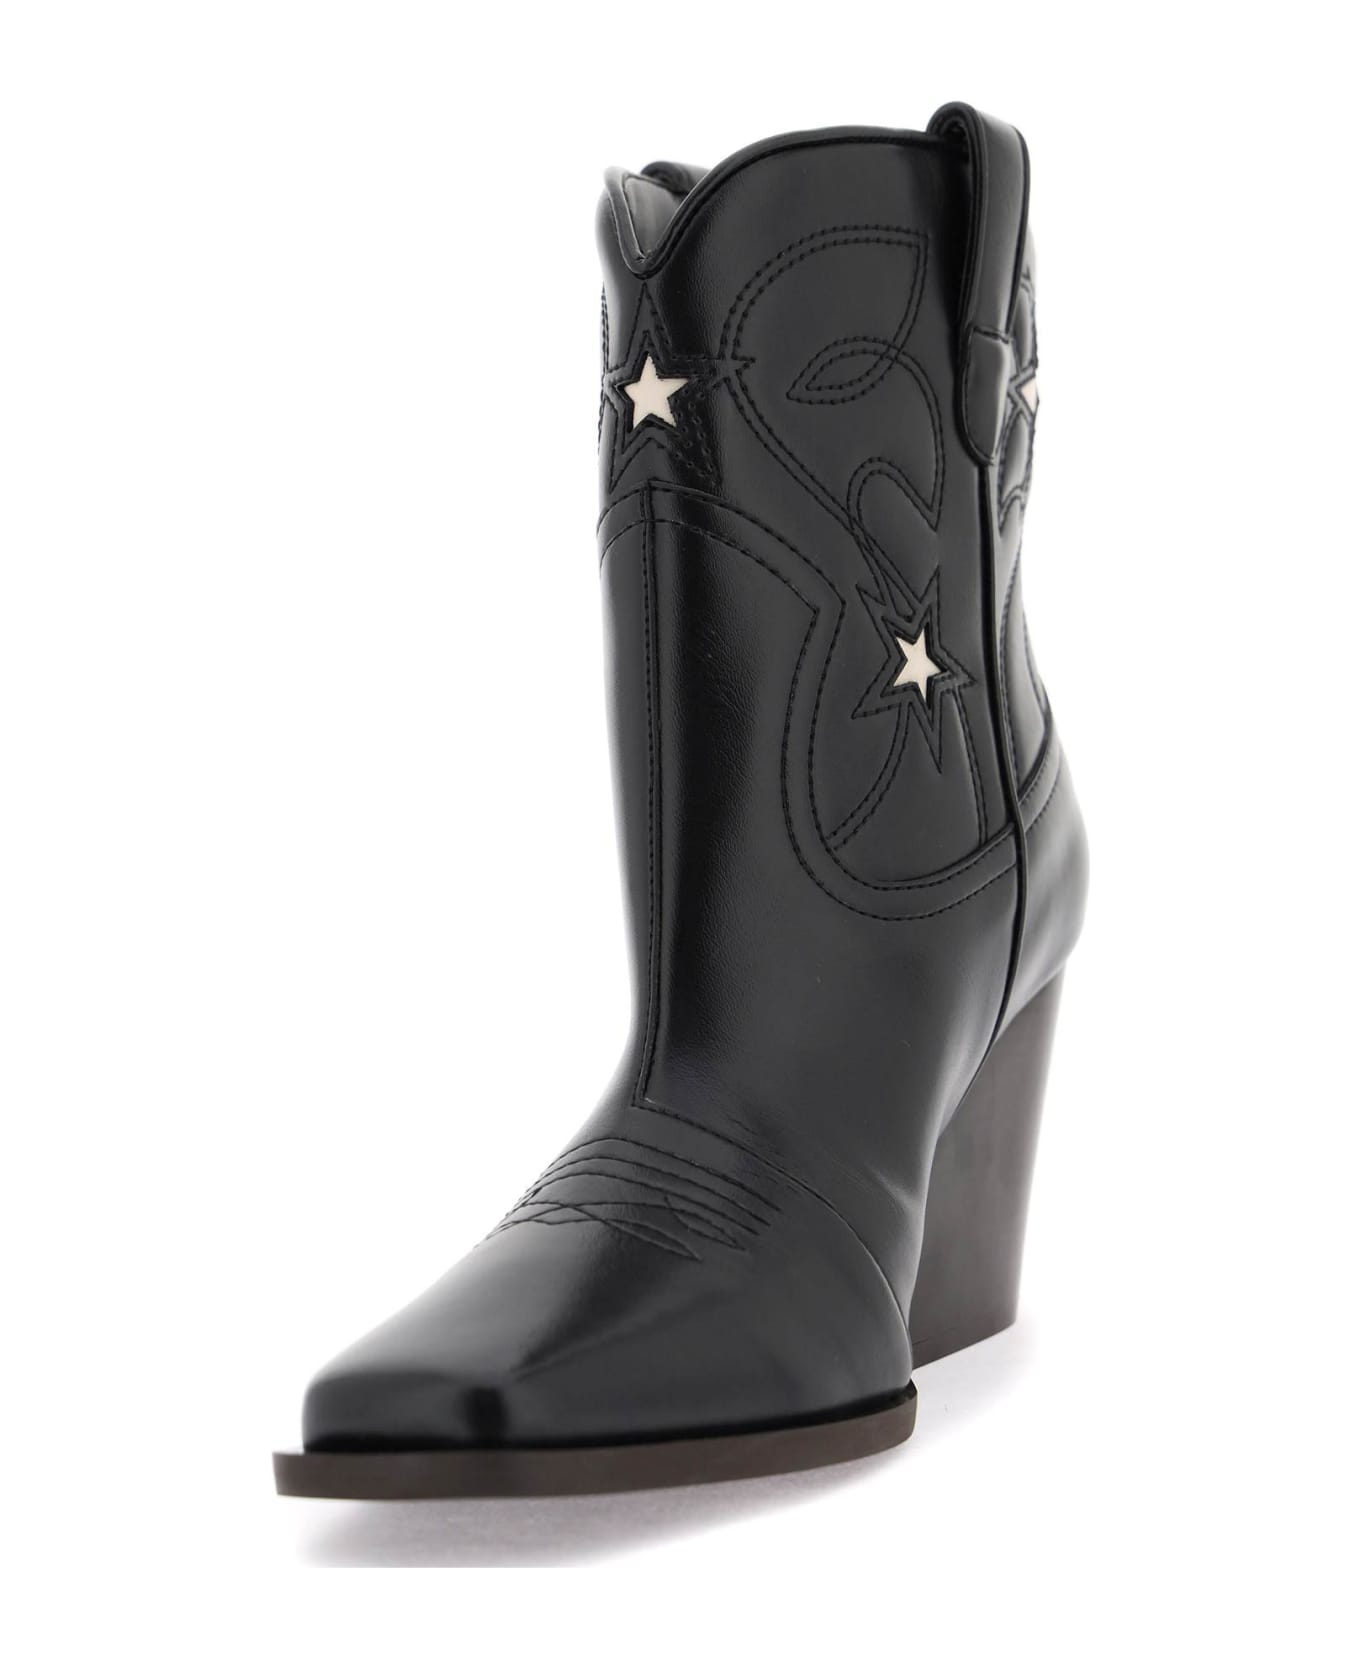 Stella McCartney Texan Ankle Boots With Star Embroidery - BLACK STONE (Black)